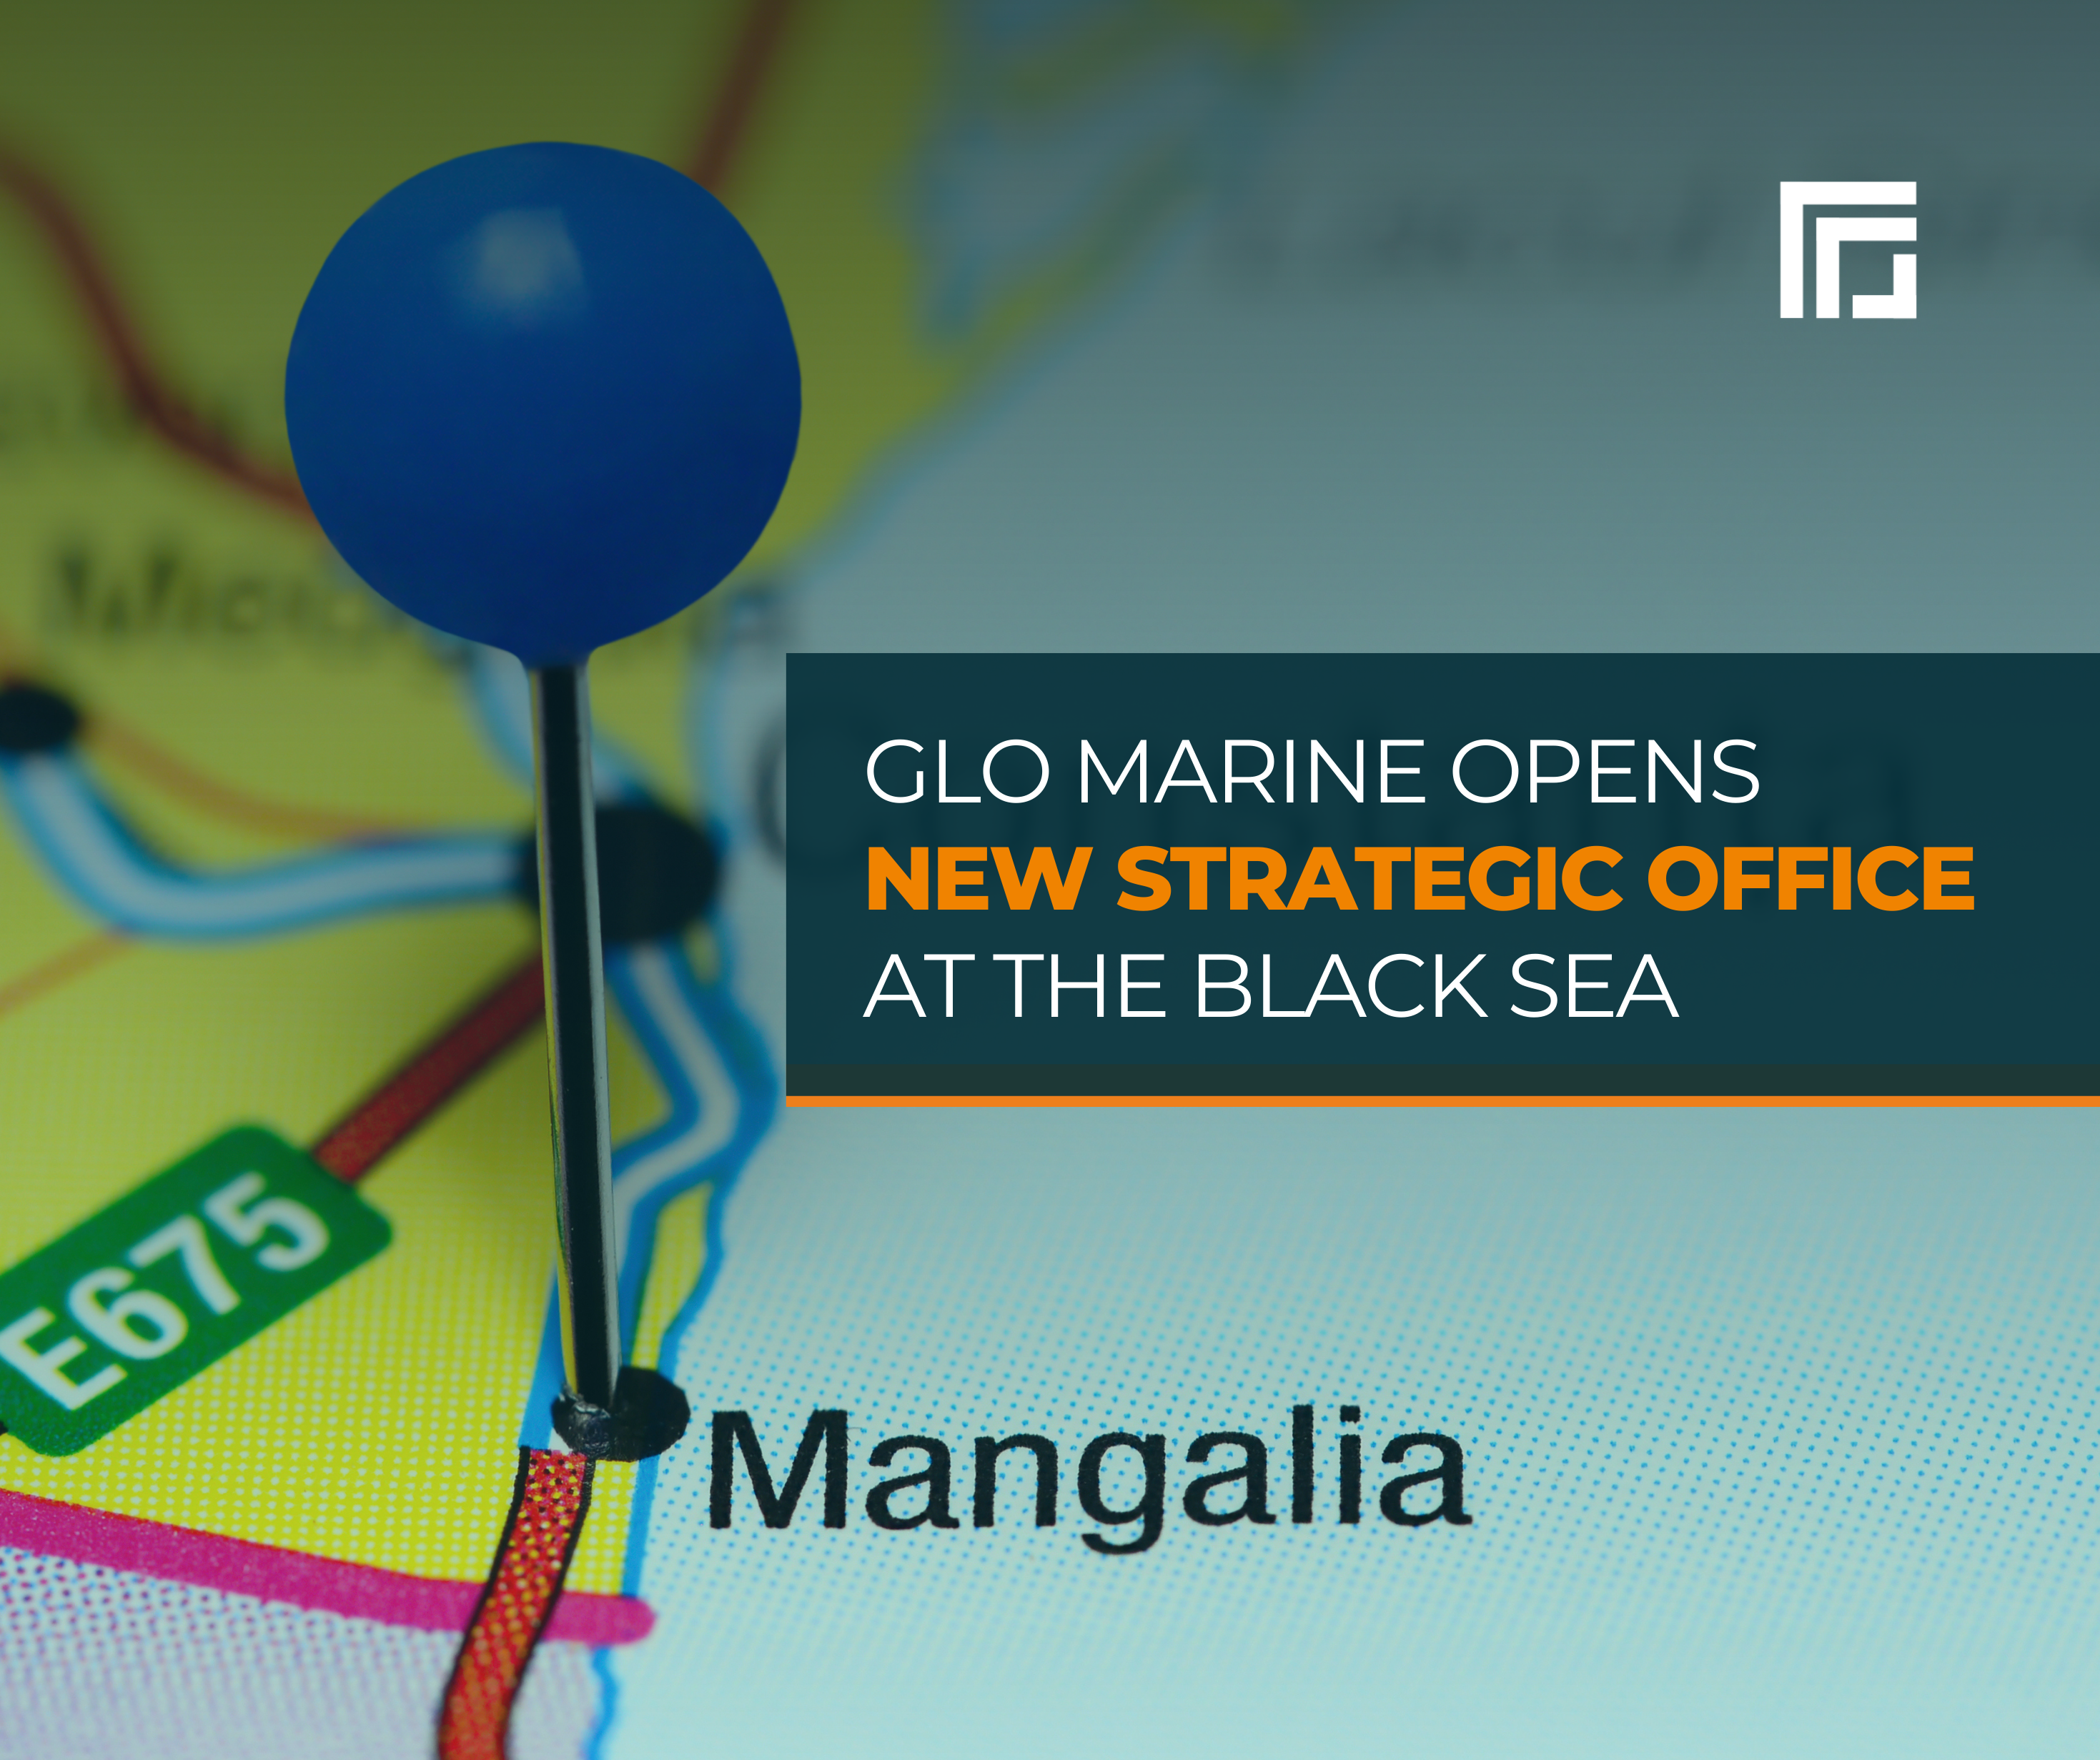 GLO Marine expands its activity with a new strategic office in Mangalia